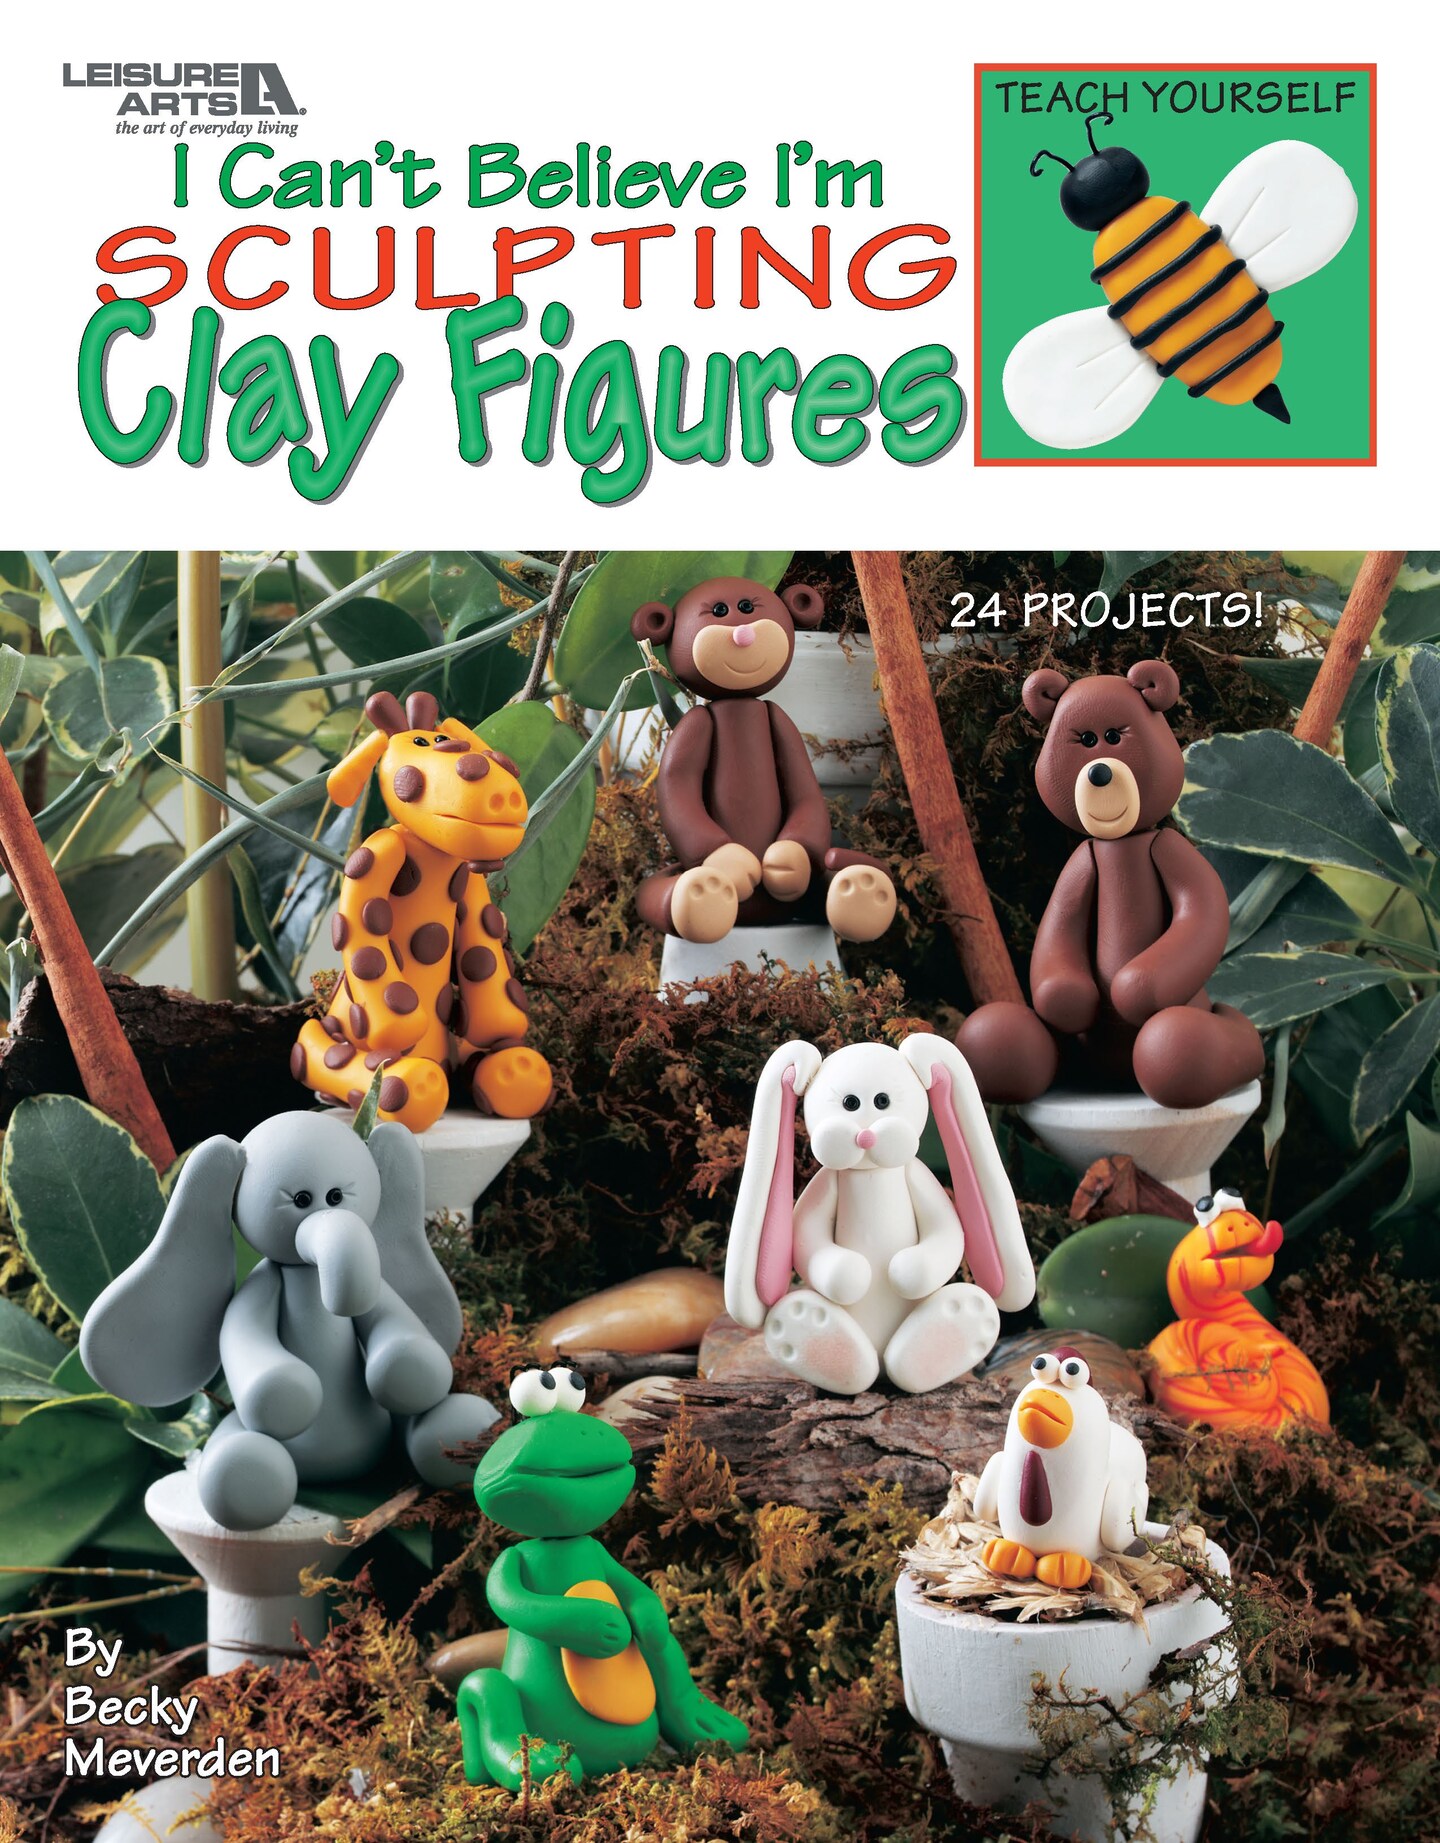 Leisure Arts Sculpting Clay Figurines Crafting Book